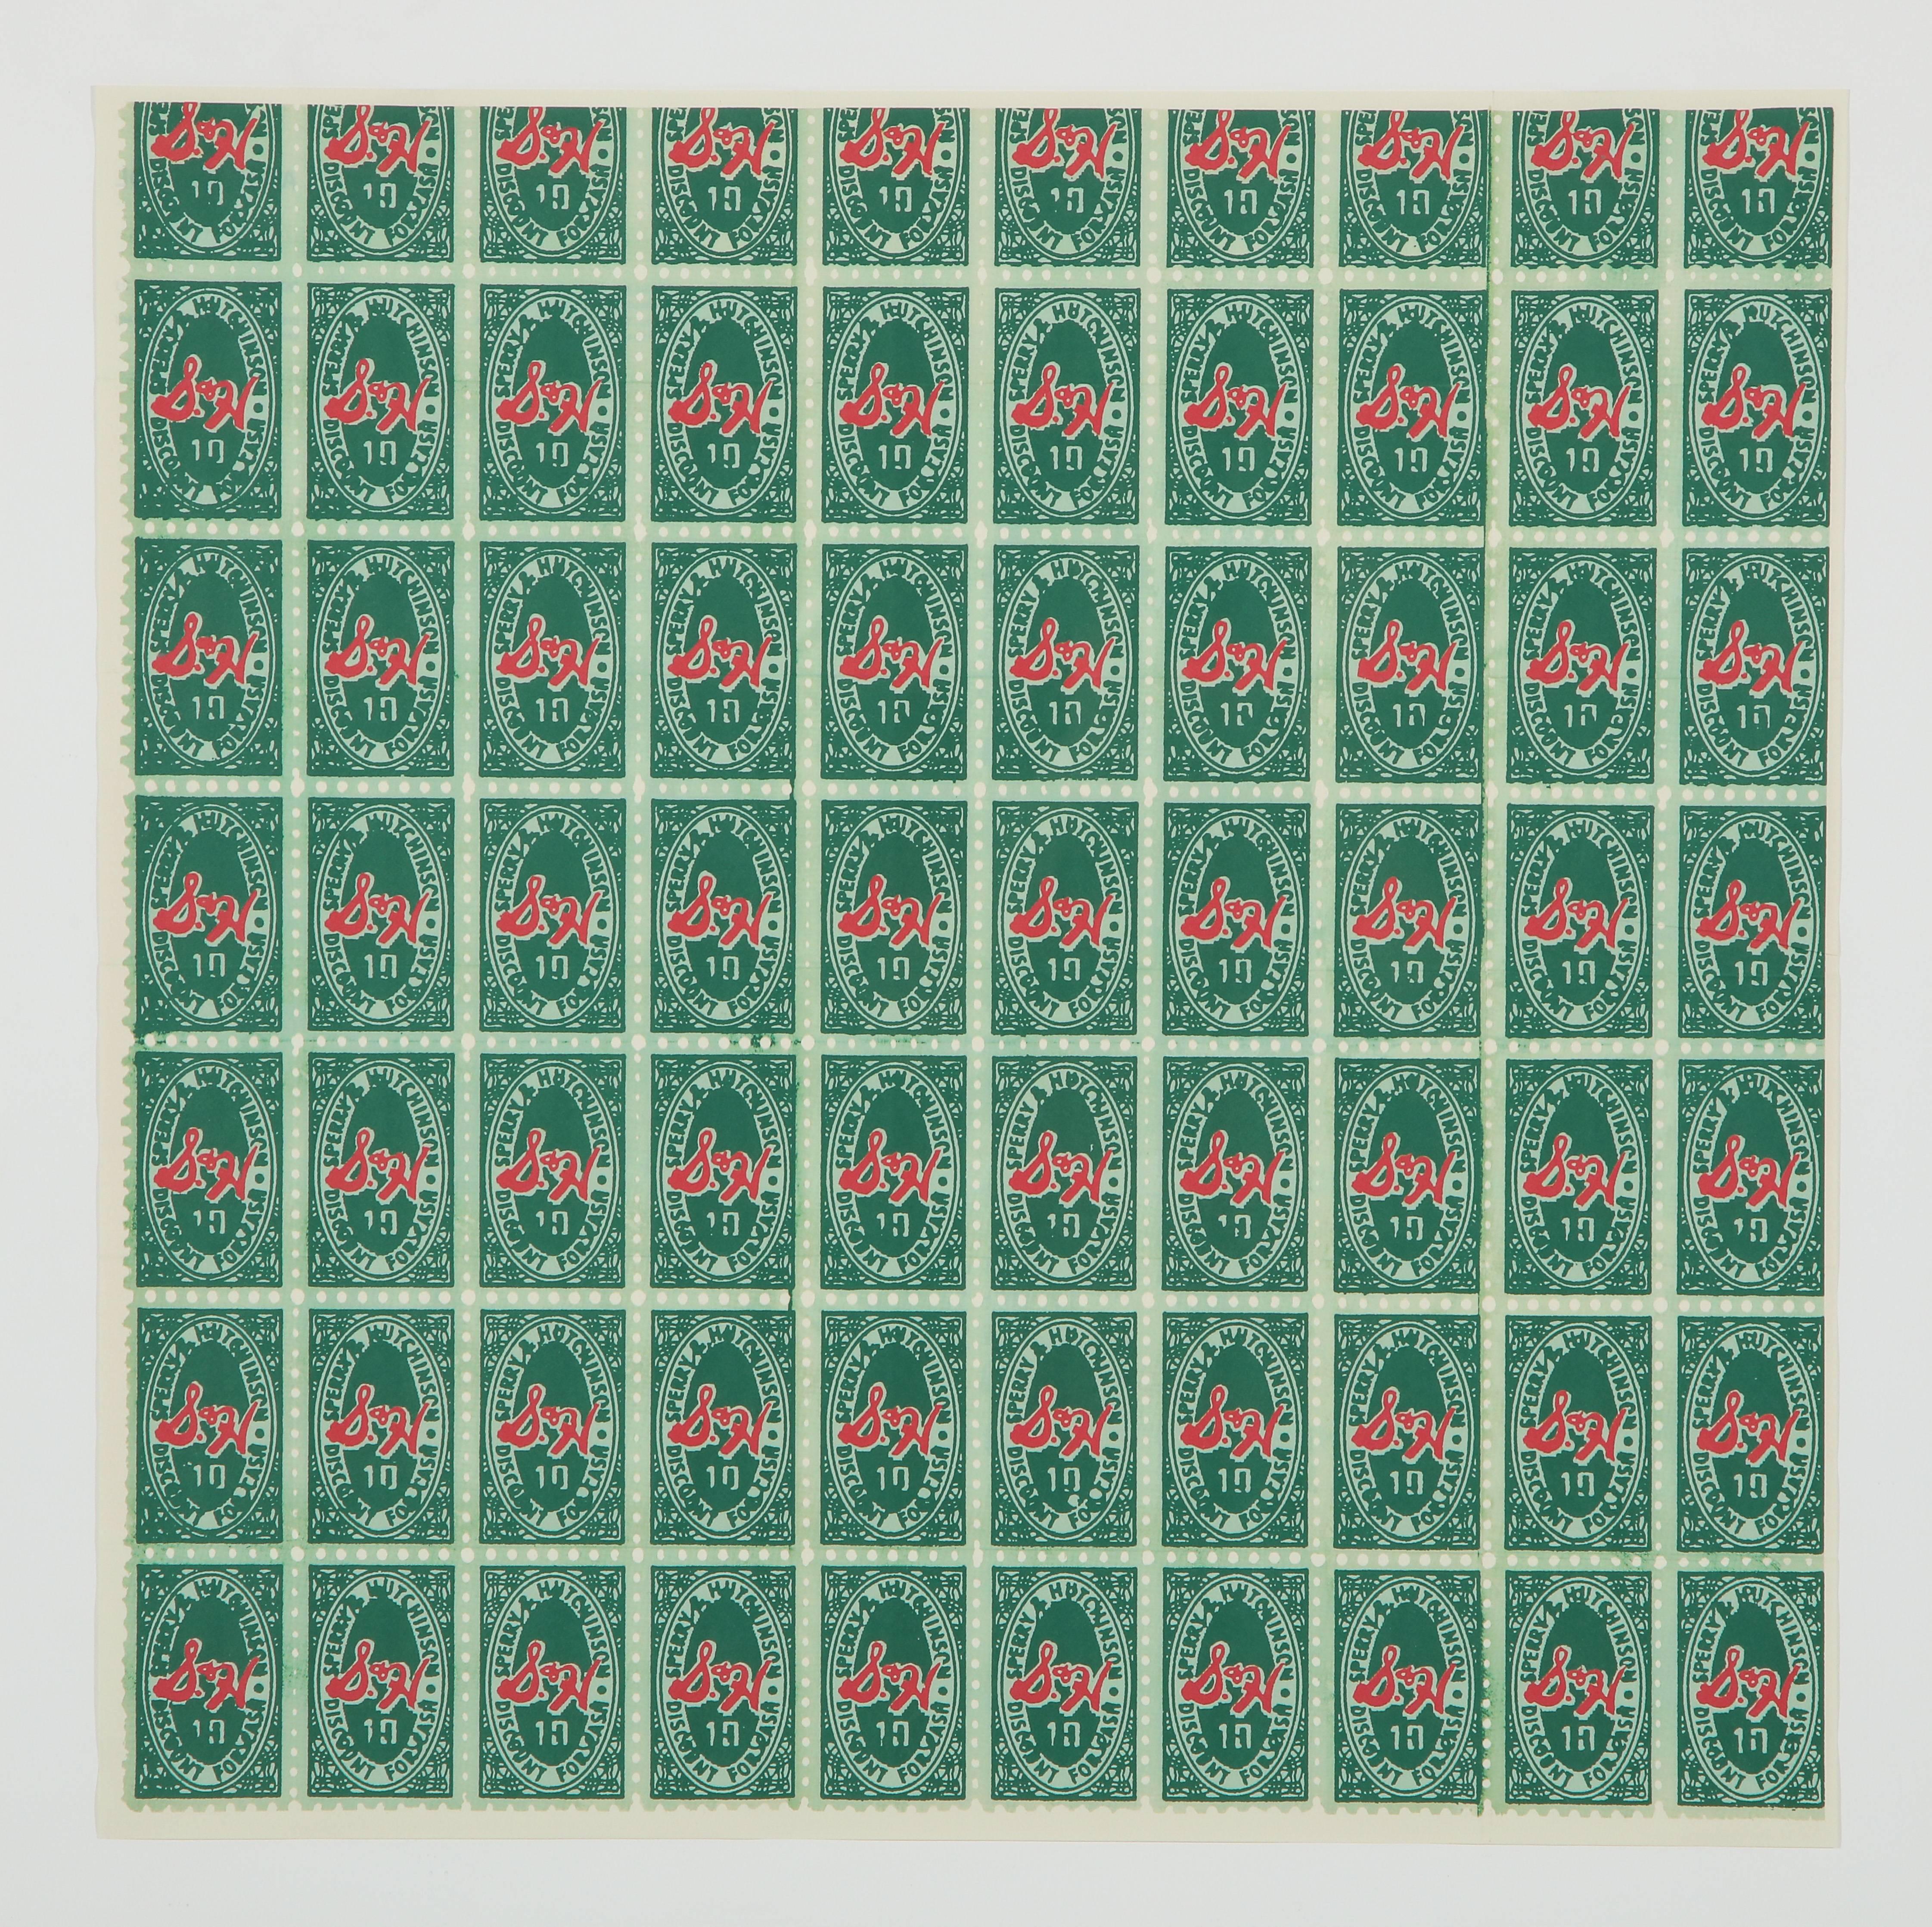 Andy Warhol S & H Green stamps, offset lithograph. Offset color lithograph to announce the Warhol exhibition preview at the University of Pennsylvania on October 8th, 1965. Printed by Eugene Feldman, Philadelphia. Published by the Institute of